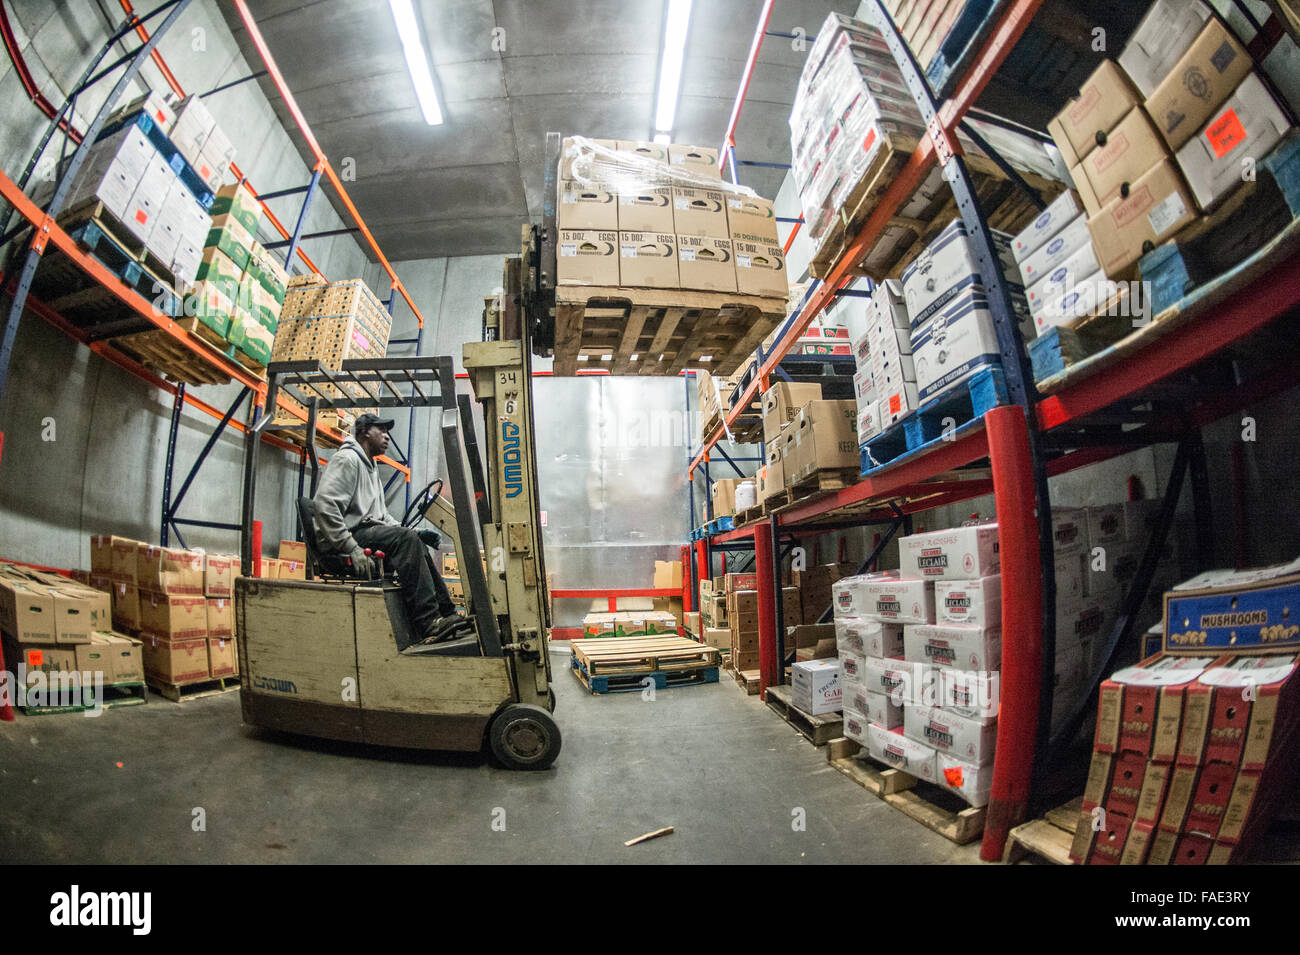 Workers managing the boxes inside of a wholesale produce market Stock Photo